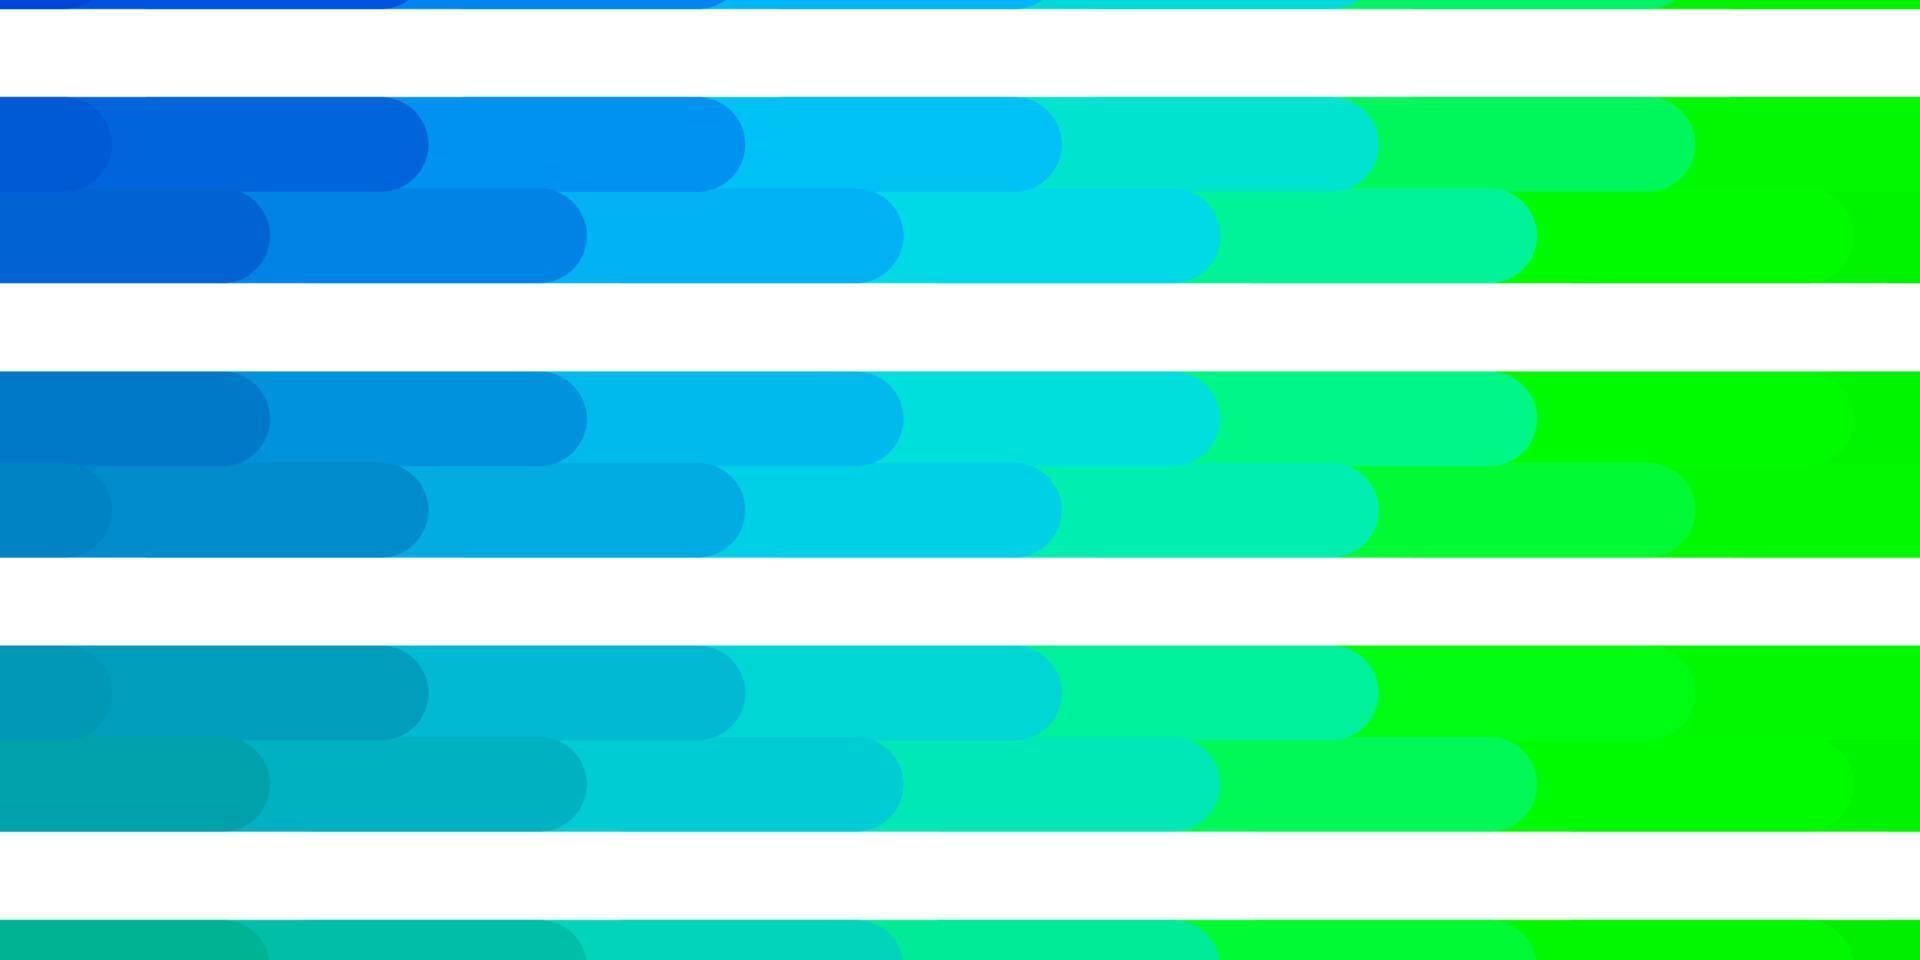 Light Blue, Green vector pattern with lines.